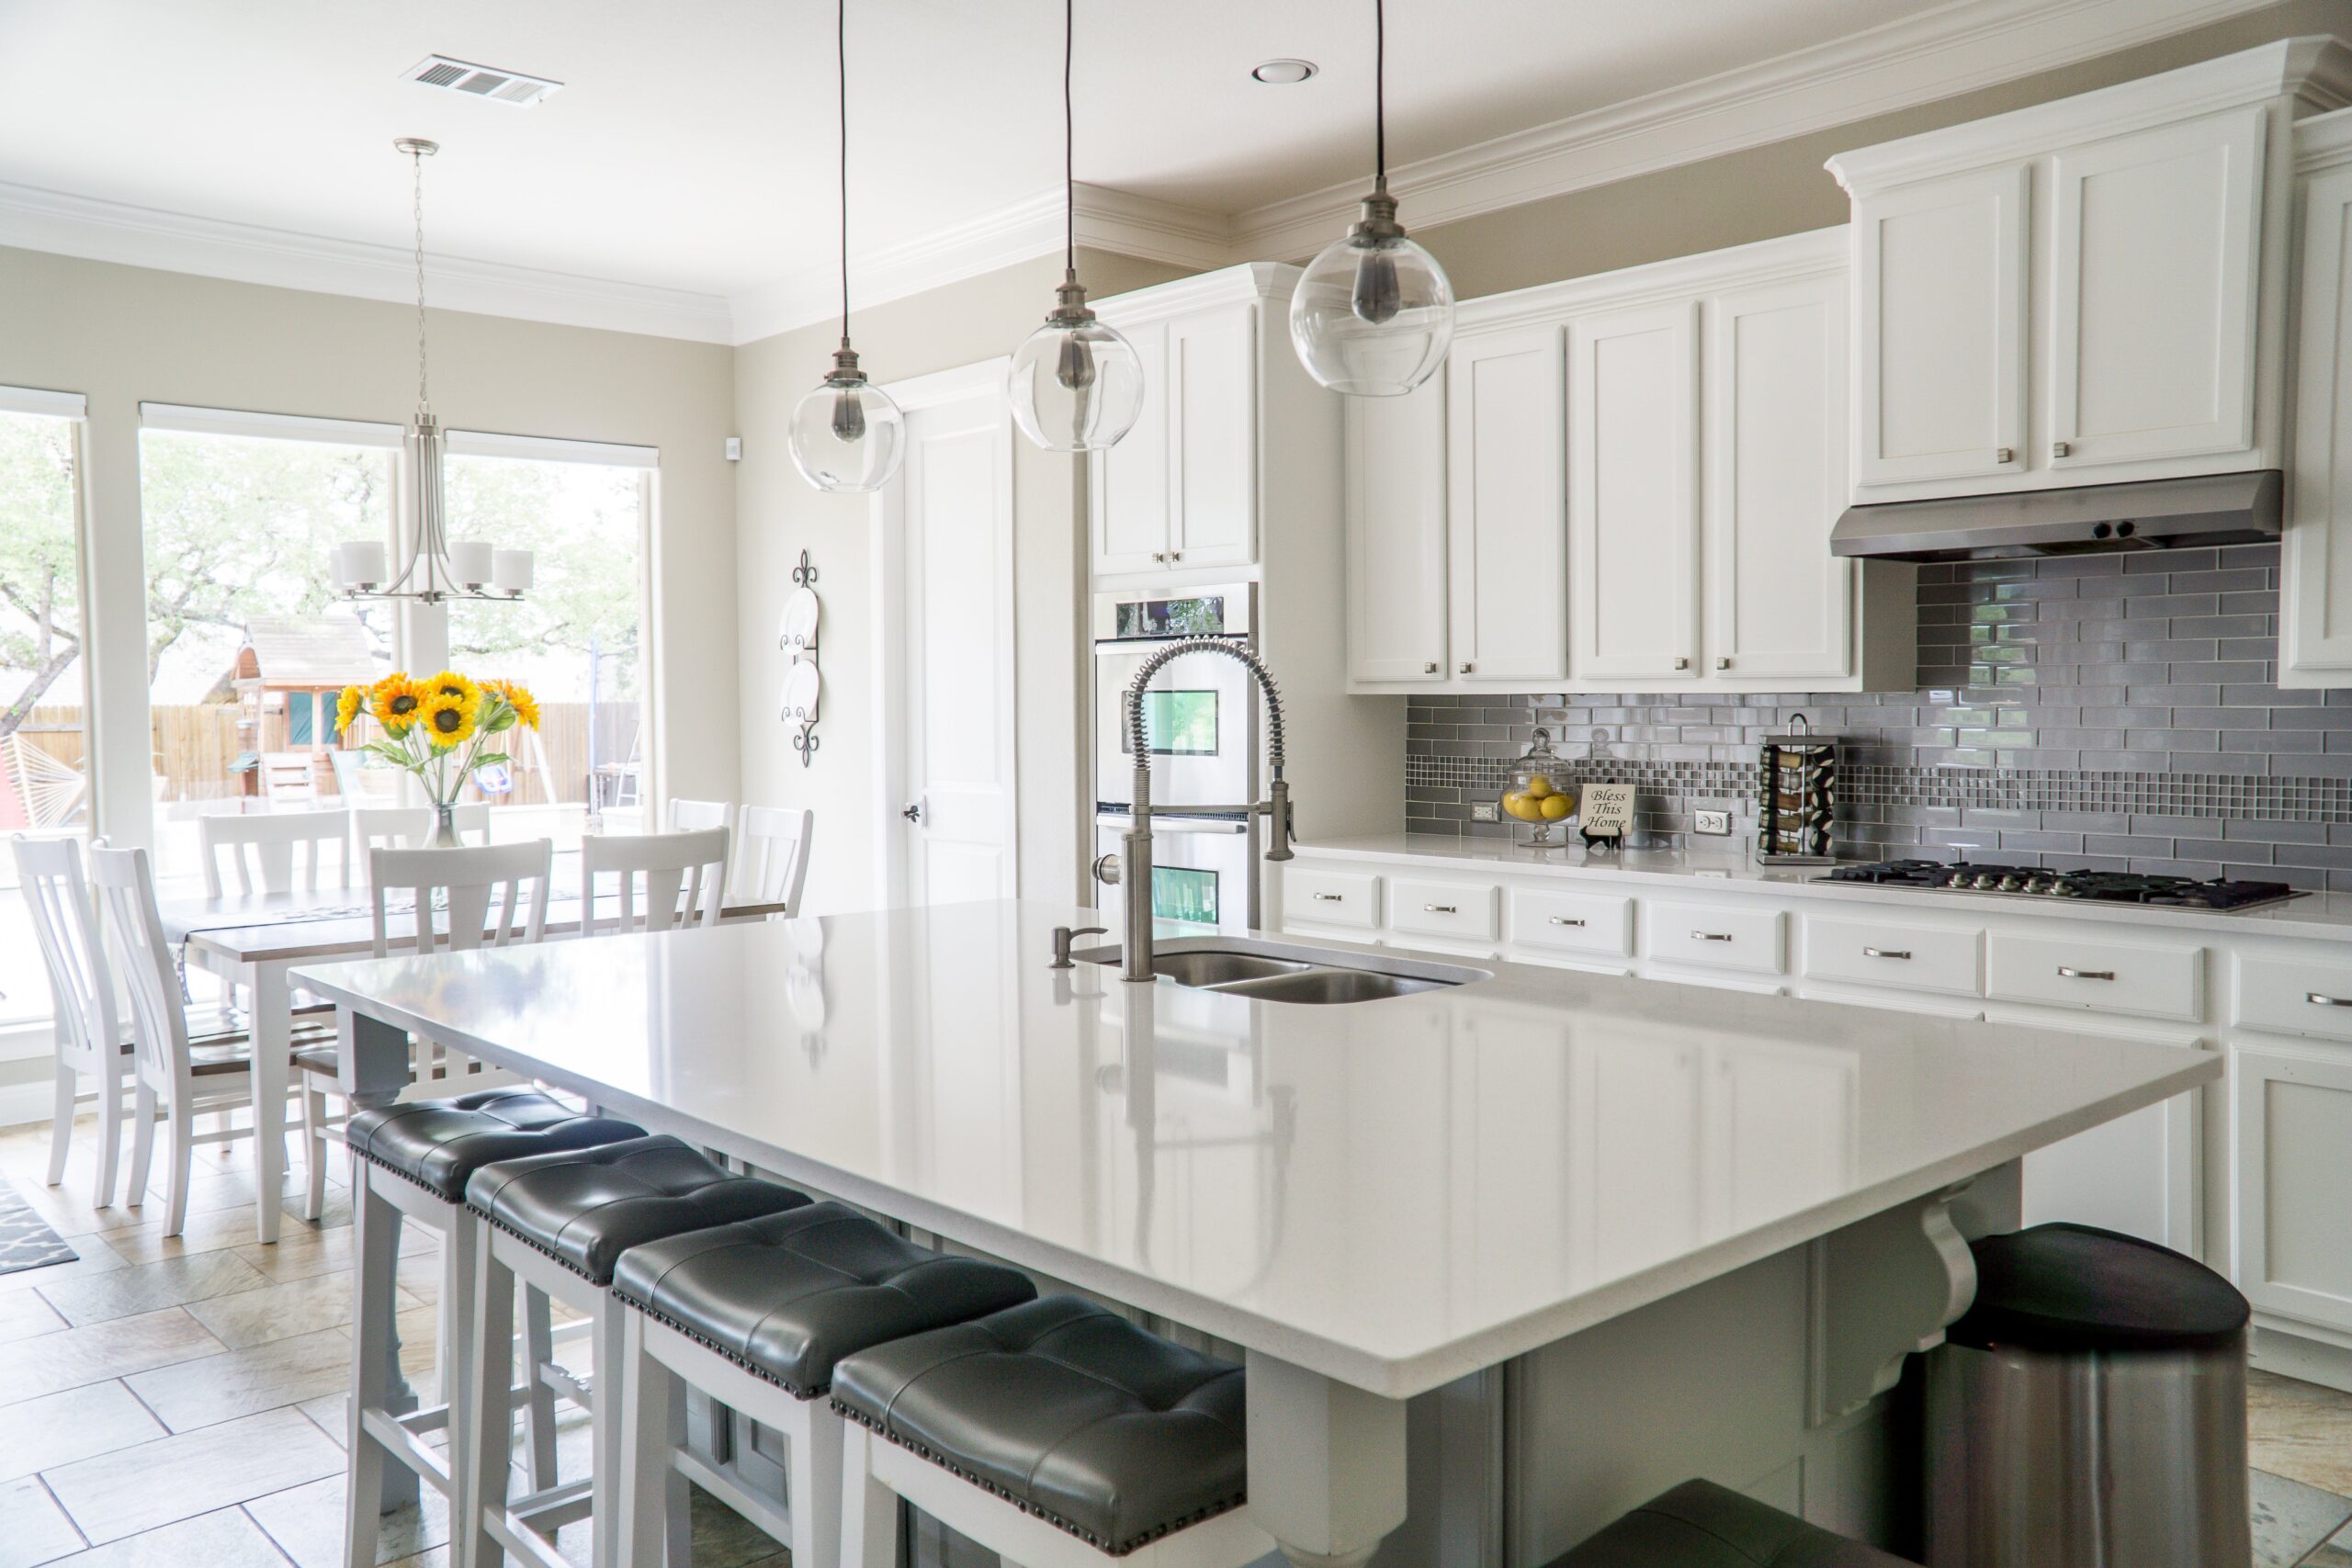 A white kitchen with a center island and stools, featuring glass splashbacks that require regular cleaning.